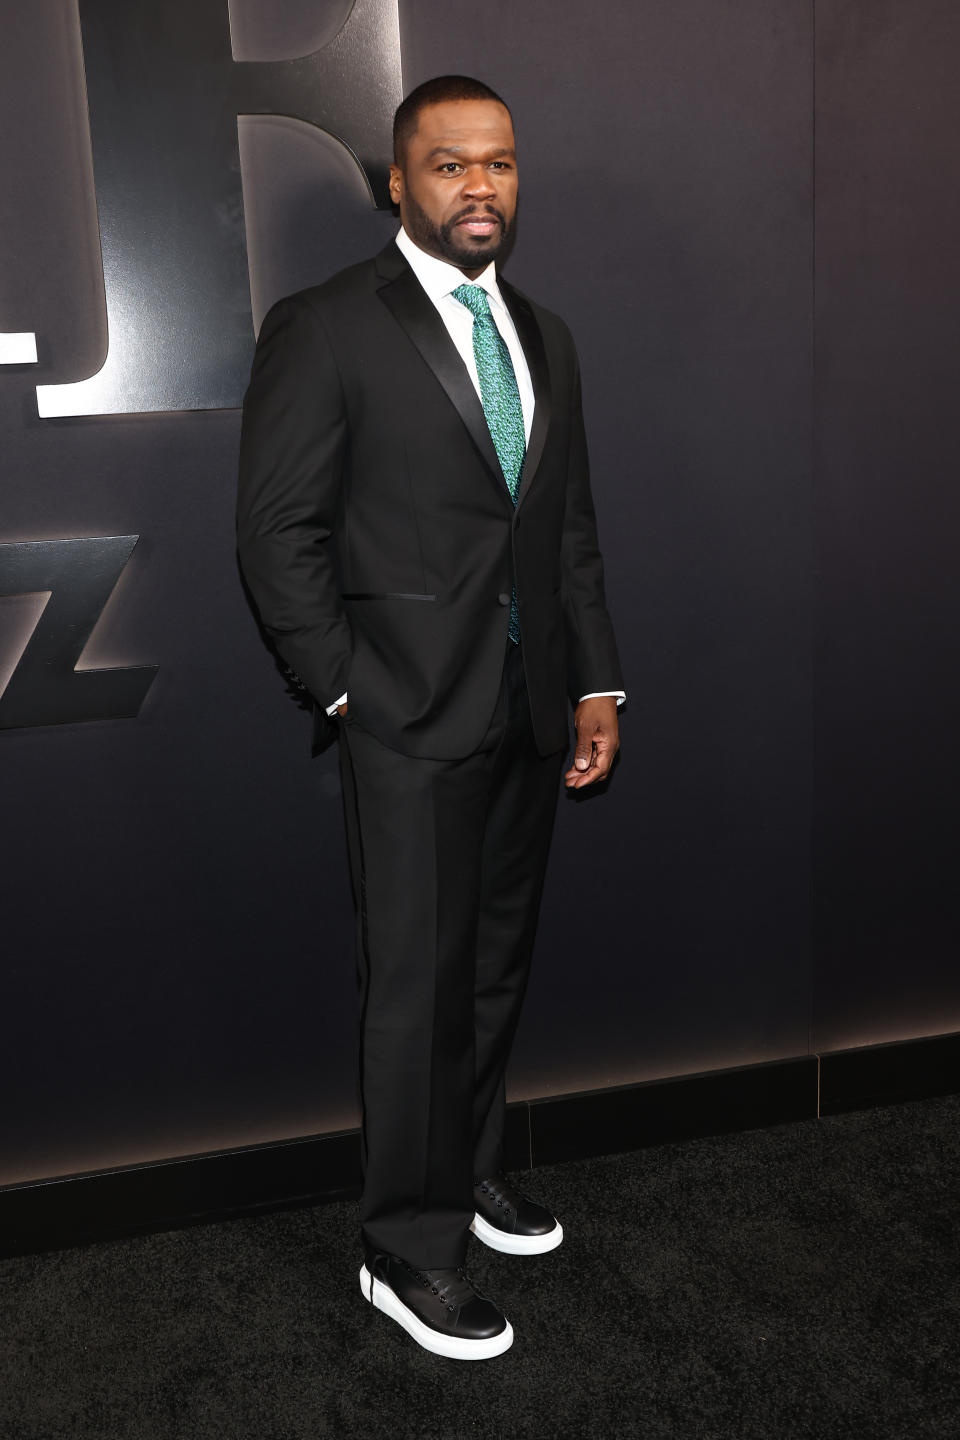 50 Cent wearing black suit and green tie.